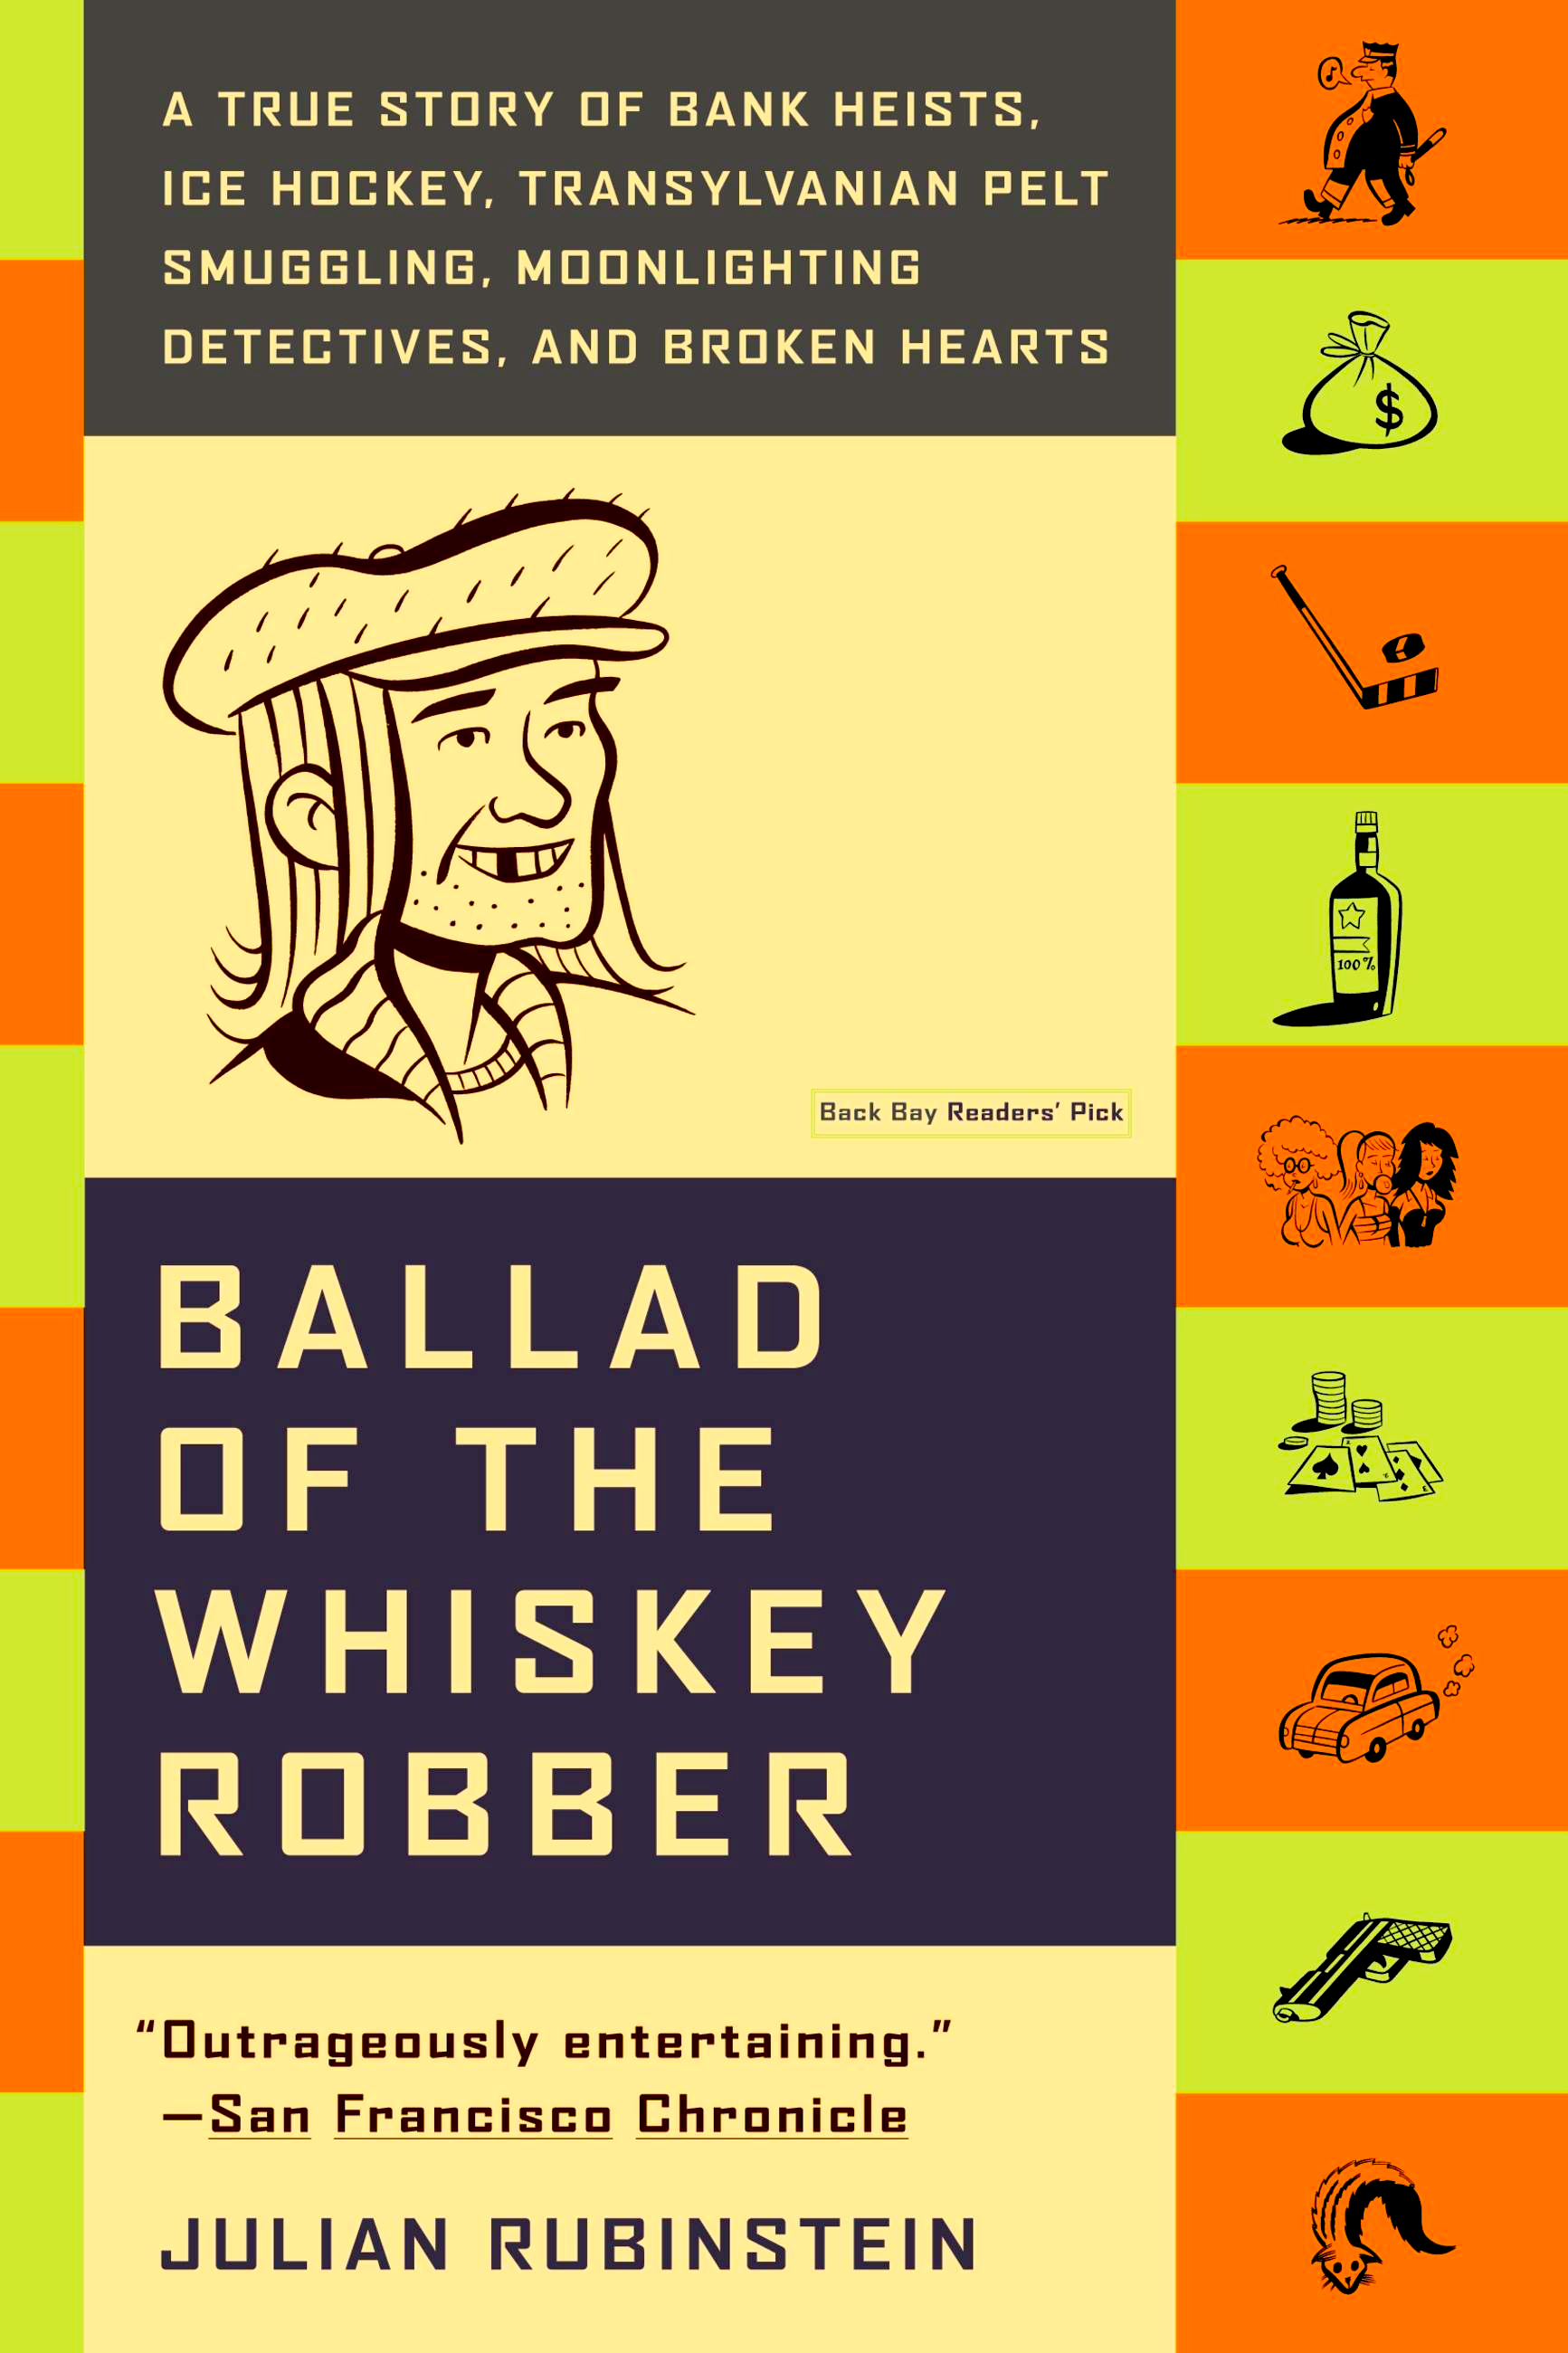 Ballad of the Whiskey Robber Book Cover